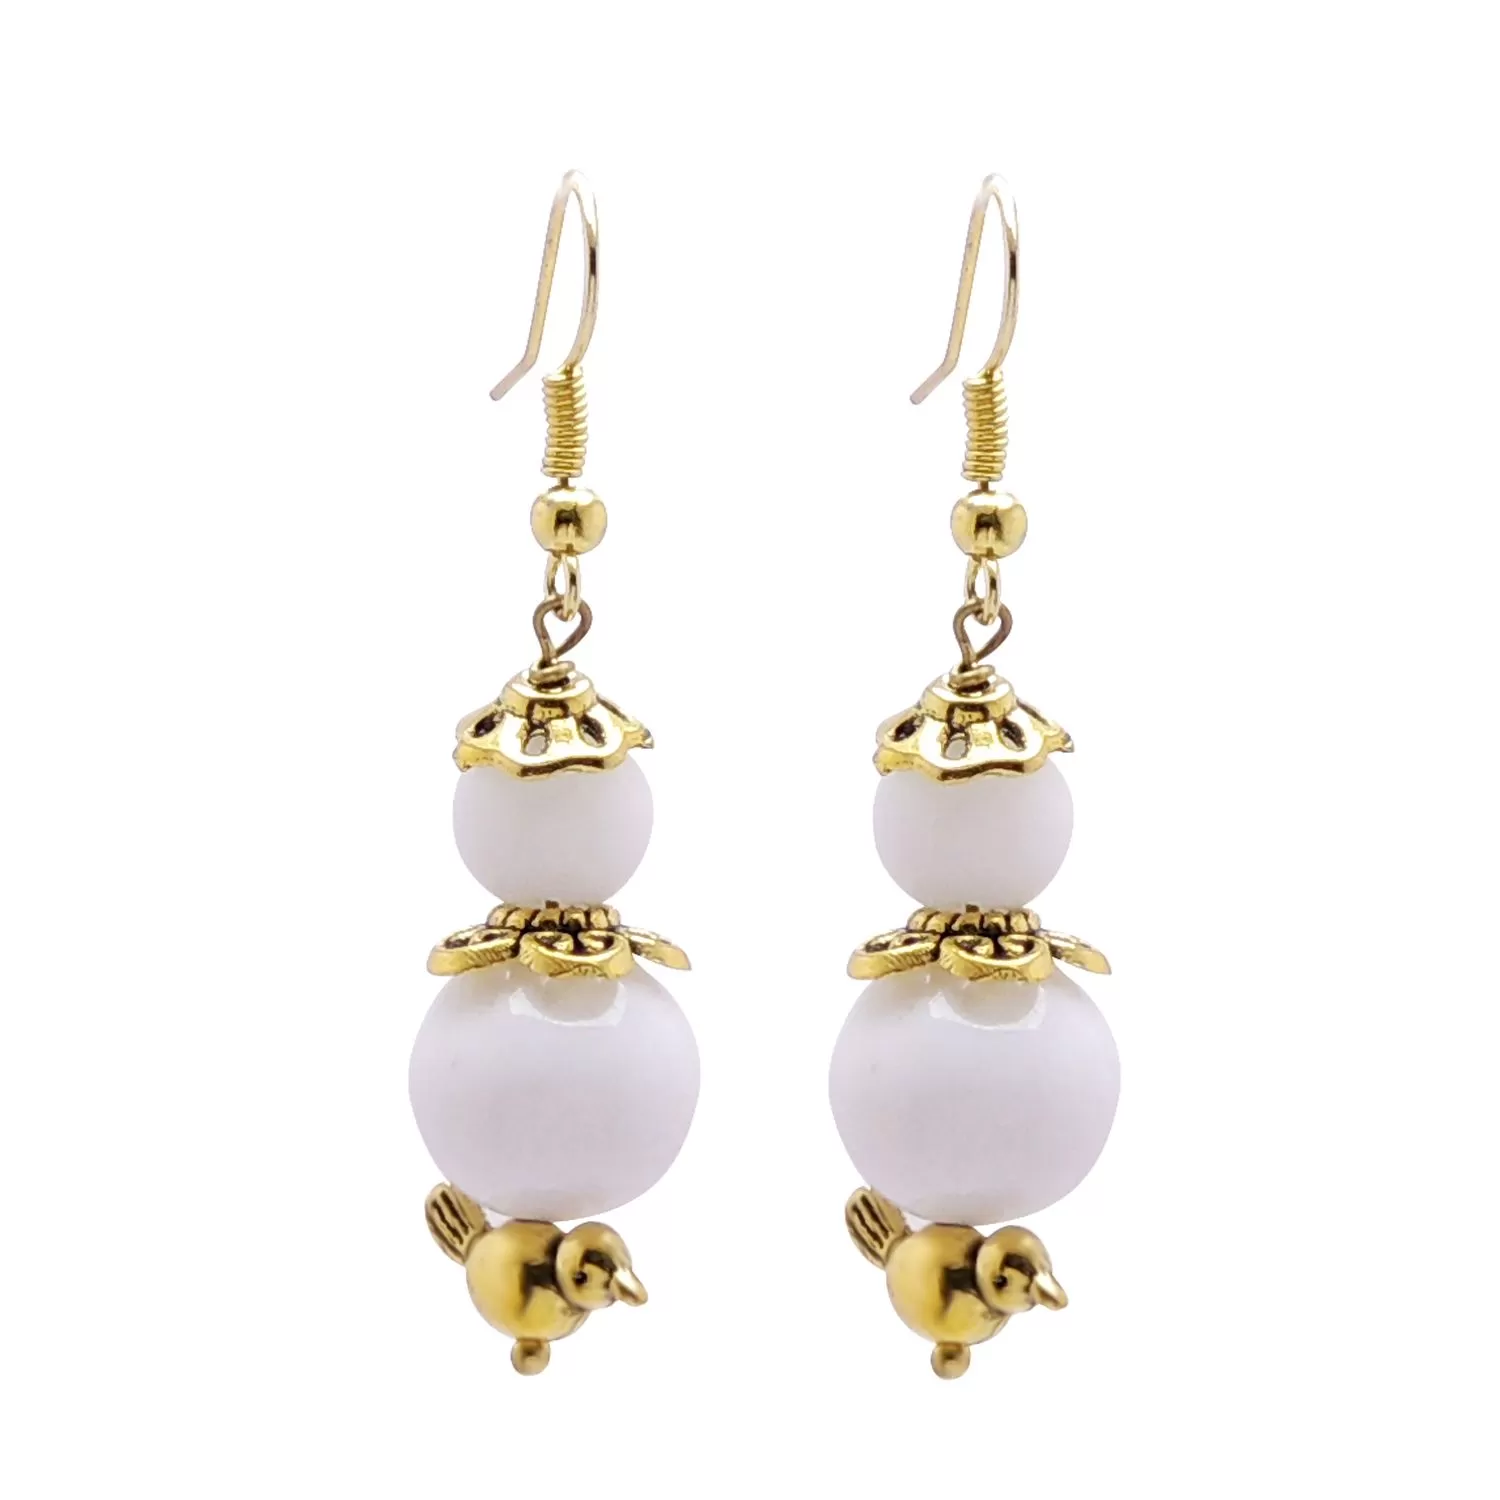 Stone Dual Pearl Earring, Color- Golden/White, For Men & Women (Pack of 1 Pc.)